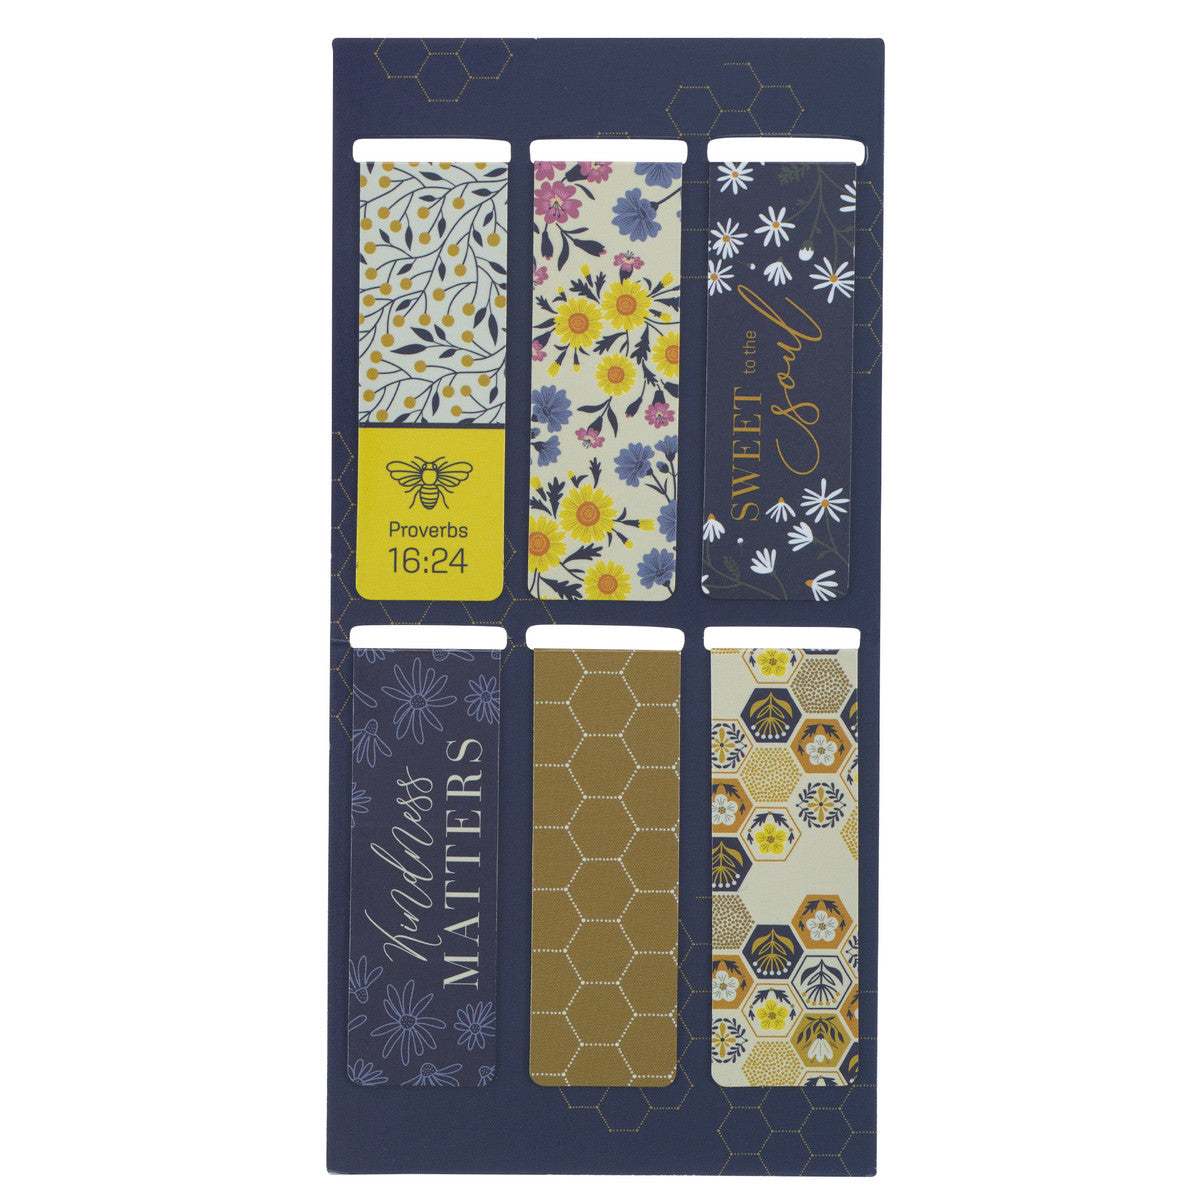 Kind Words are Like Honey Magnetic Bookmark Set - Proverbs 16:24